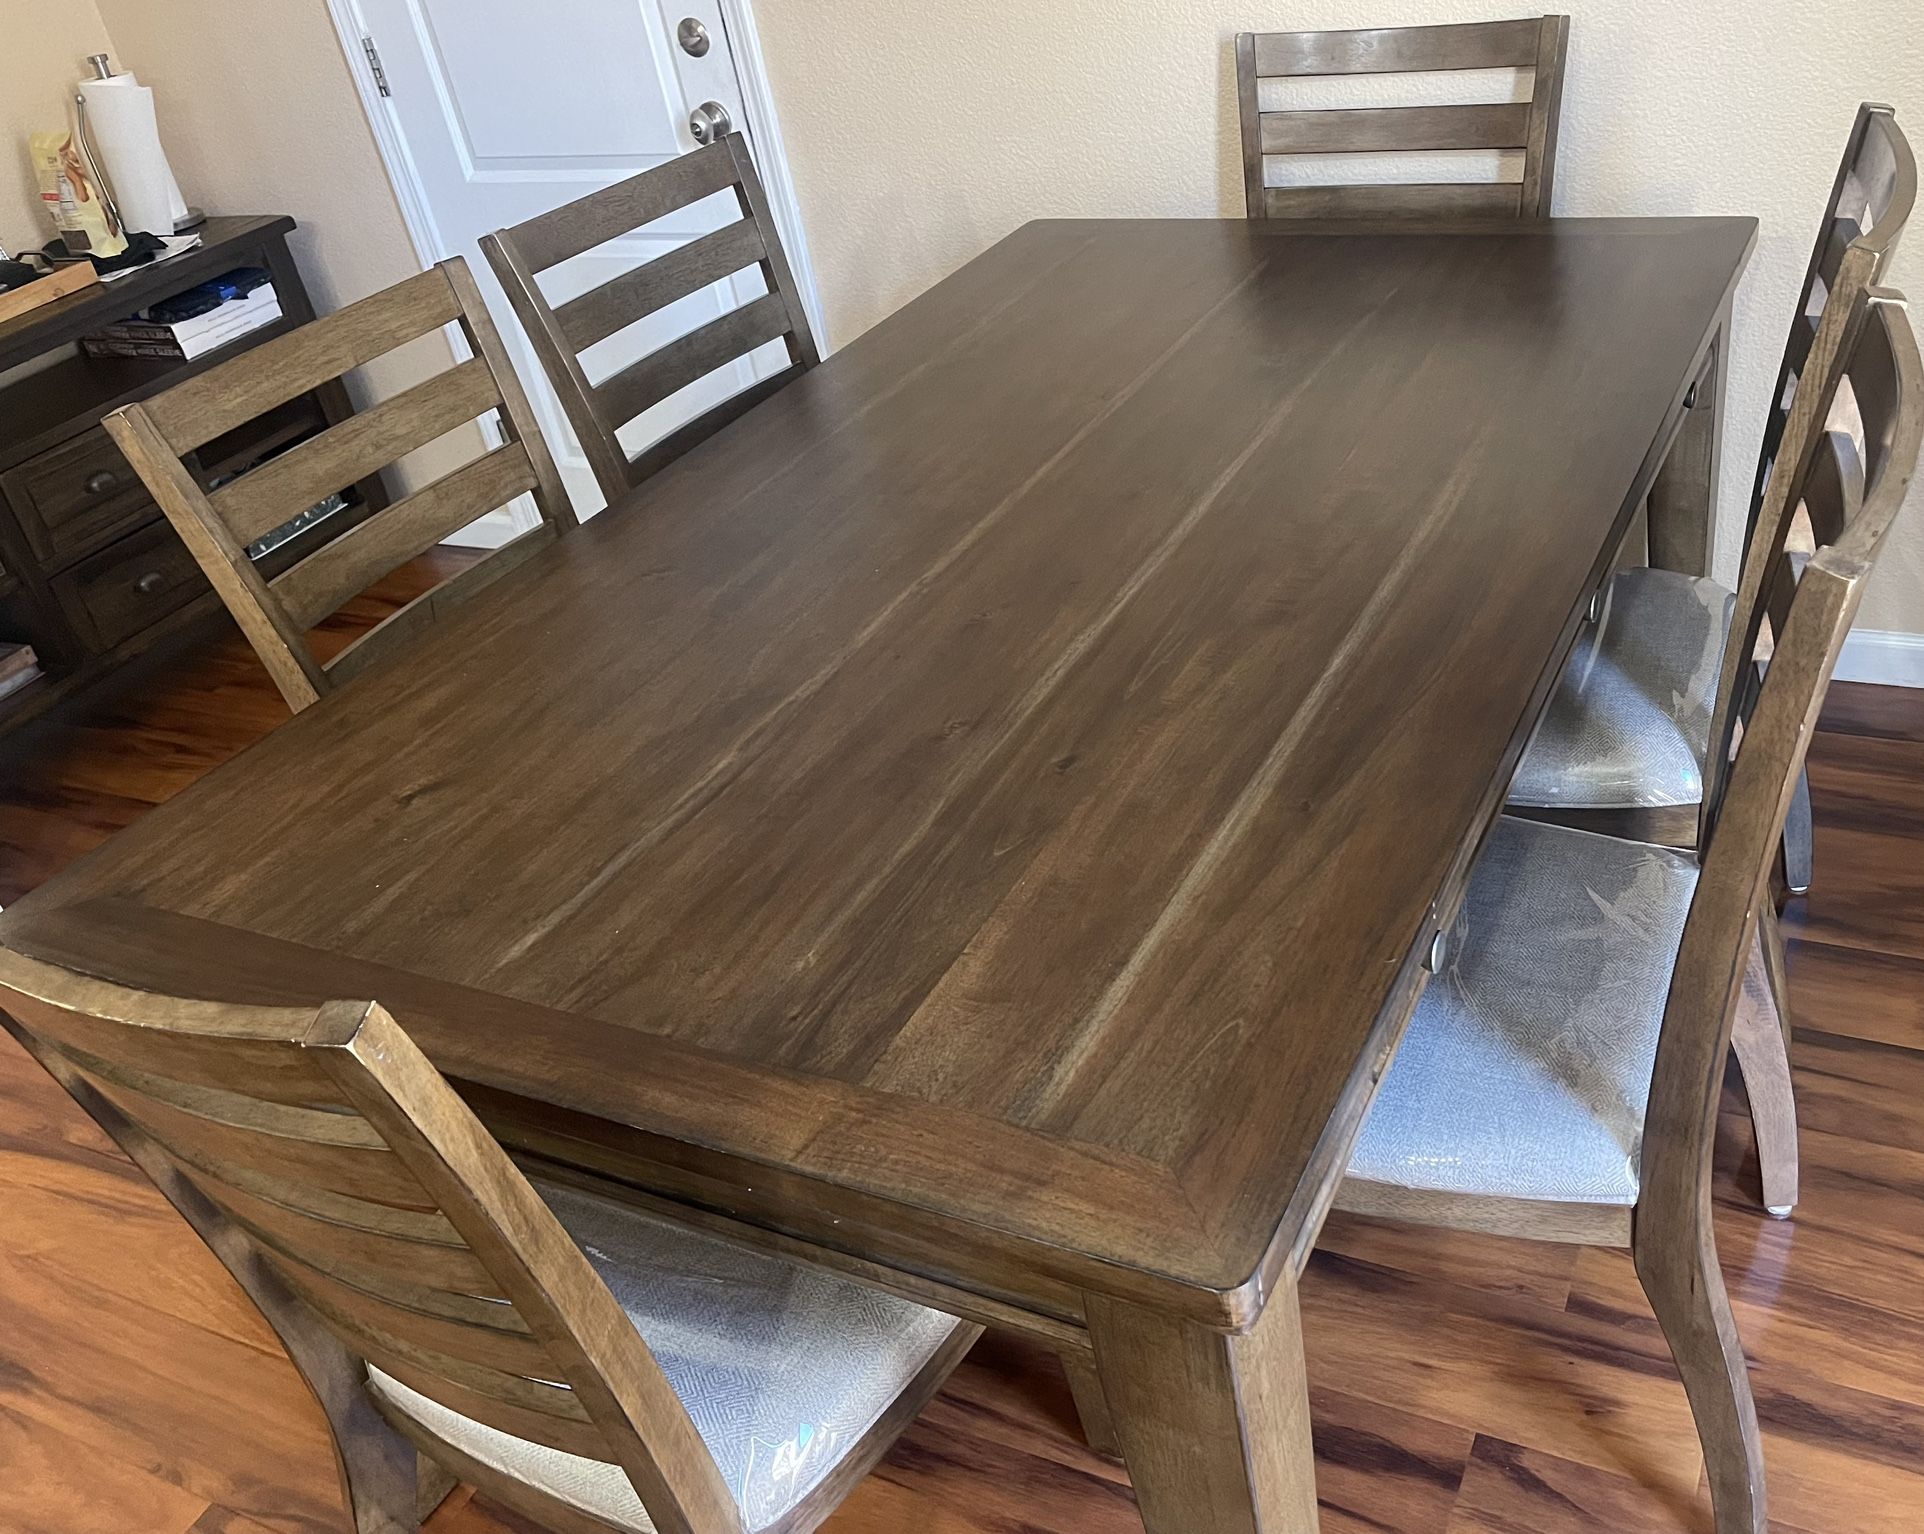 6 Chair dining table Set 